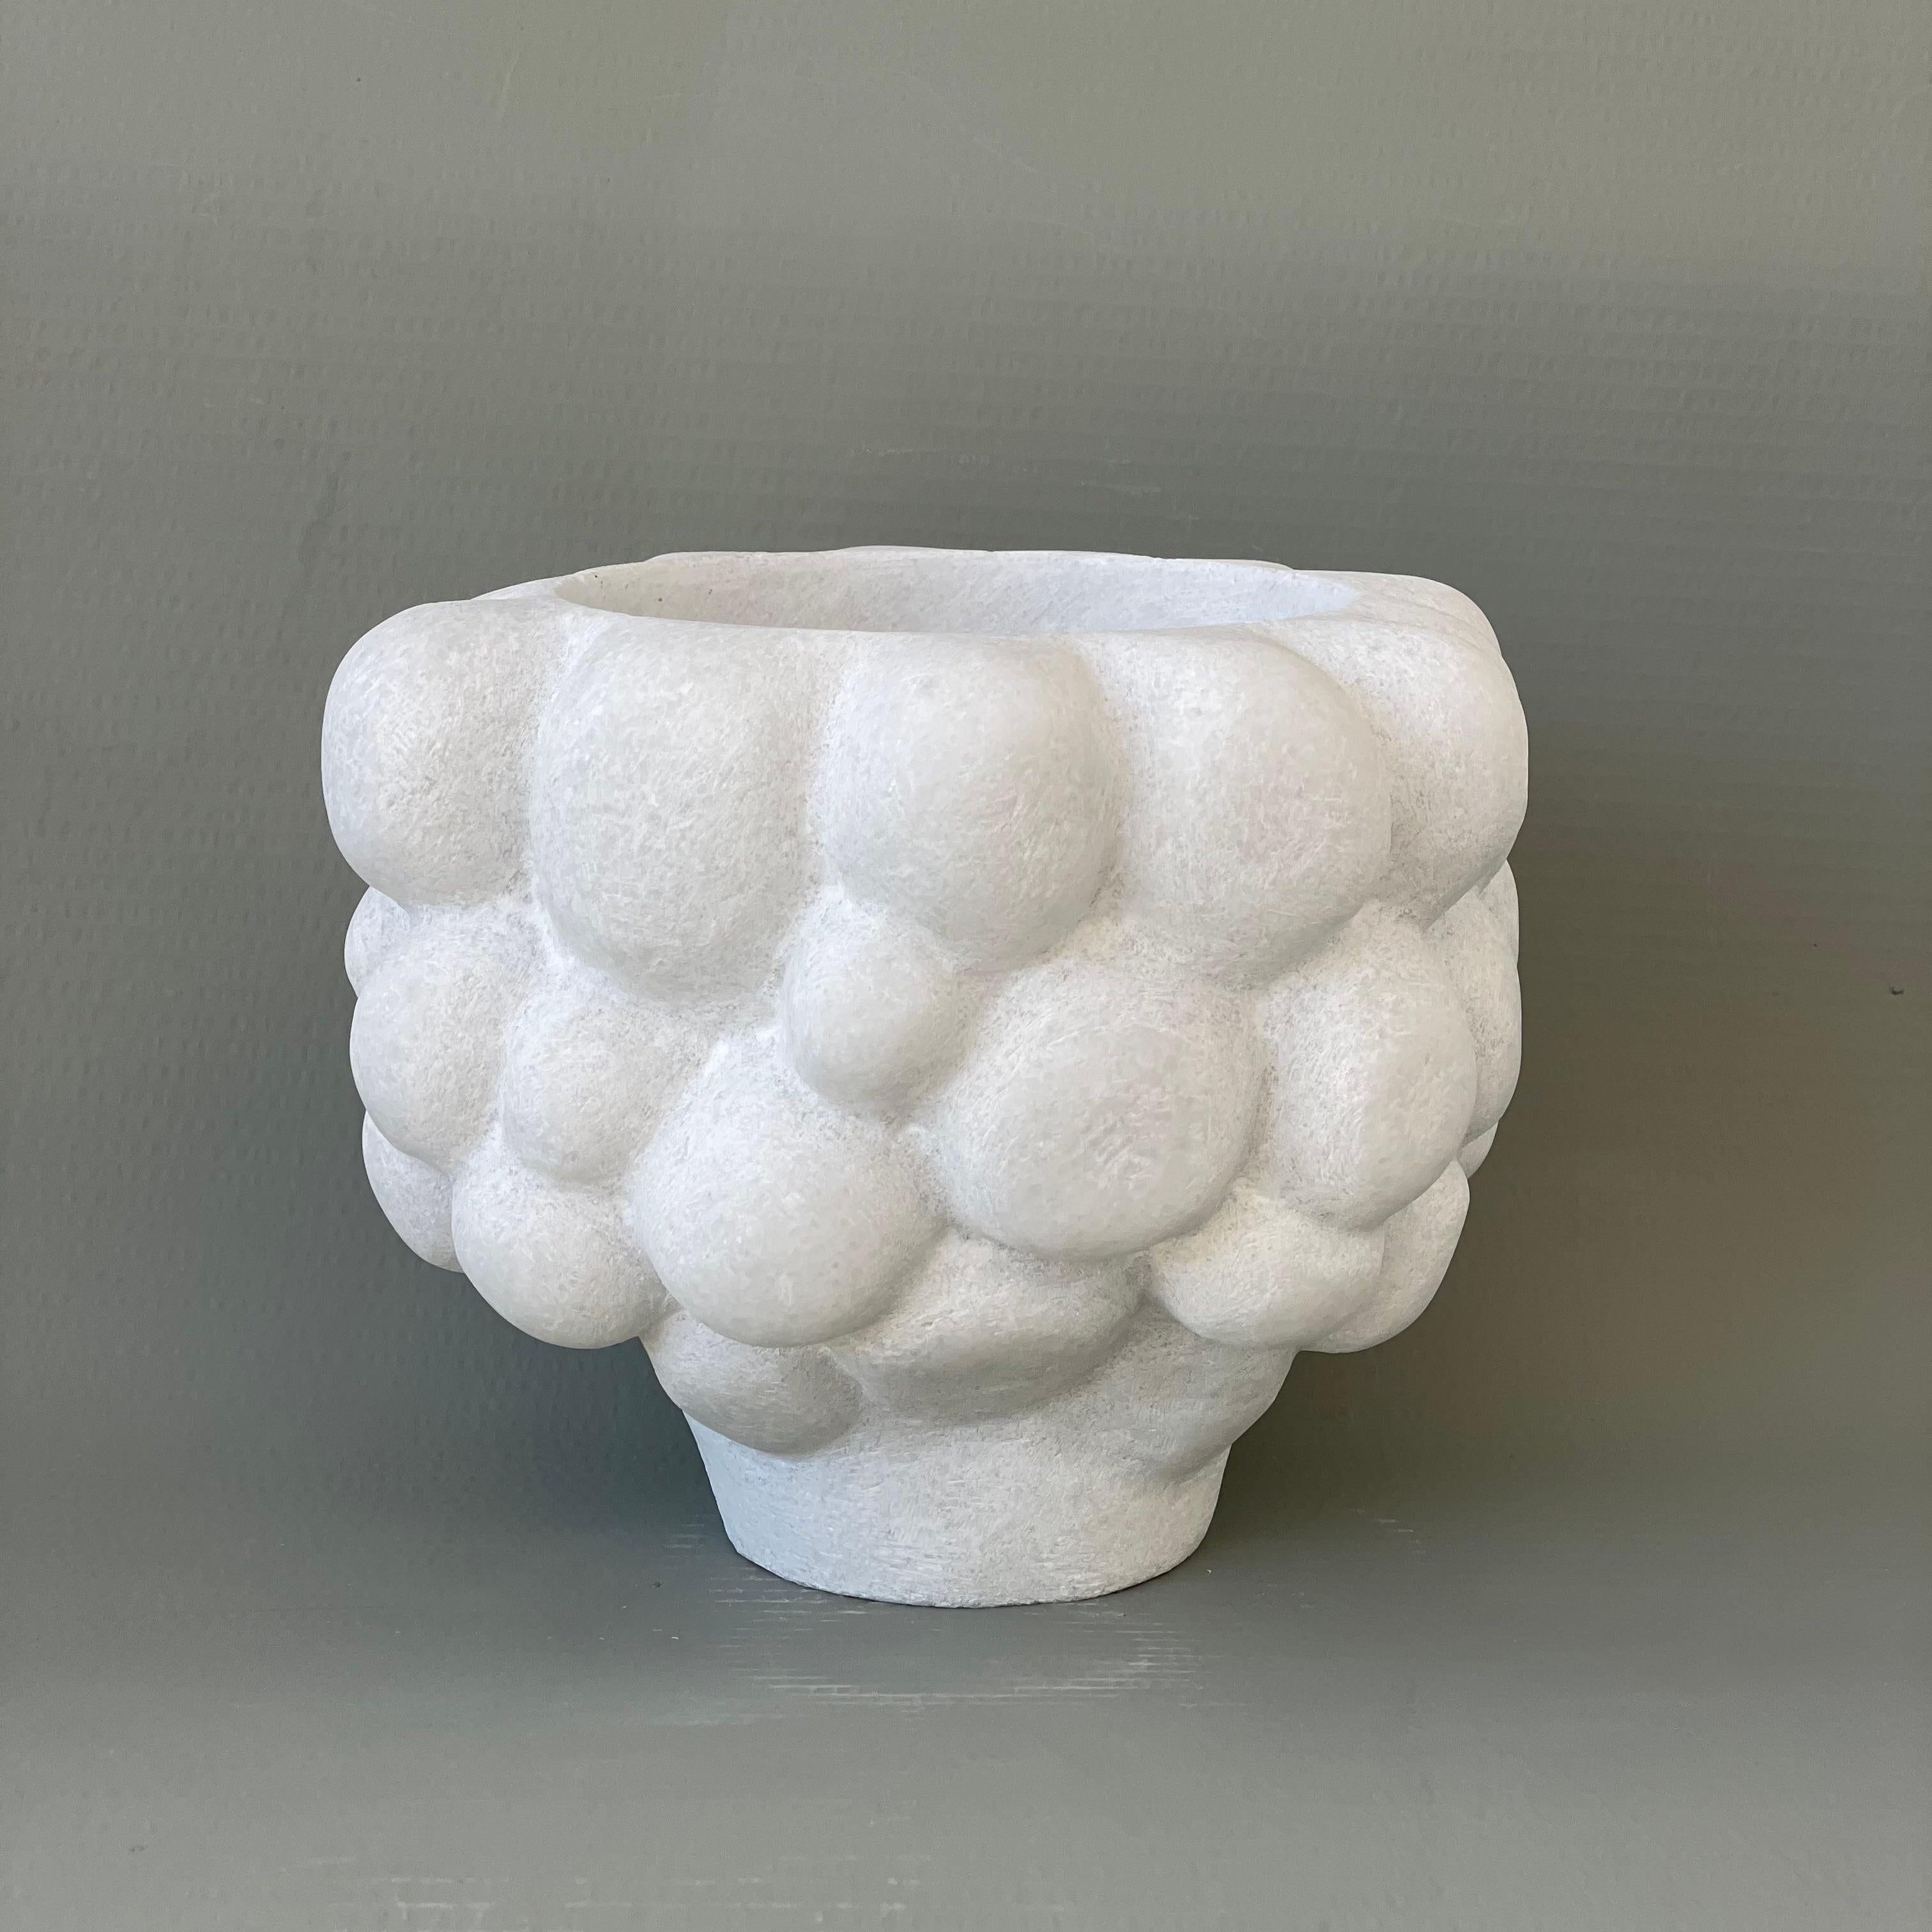 Hand carved marble vessel by Tom Von Kaenel.
Dimensions: D 22 x H 20 cm.
Materials: marble.

Tom von Kaenel, sculptor and painter, was born in Switzerland in 1961. Already in his early childhood he was deeply devoted to art. His desire to bring